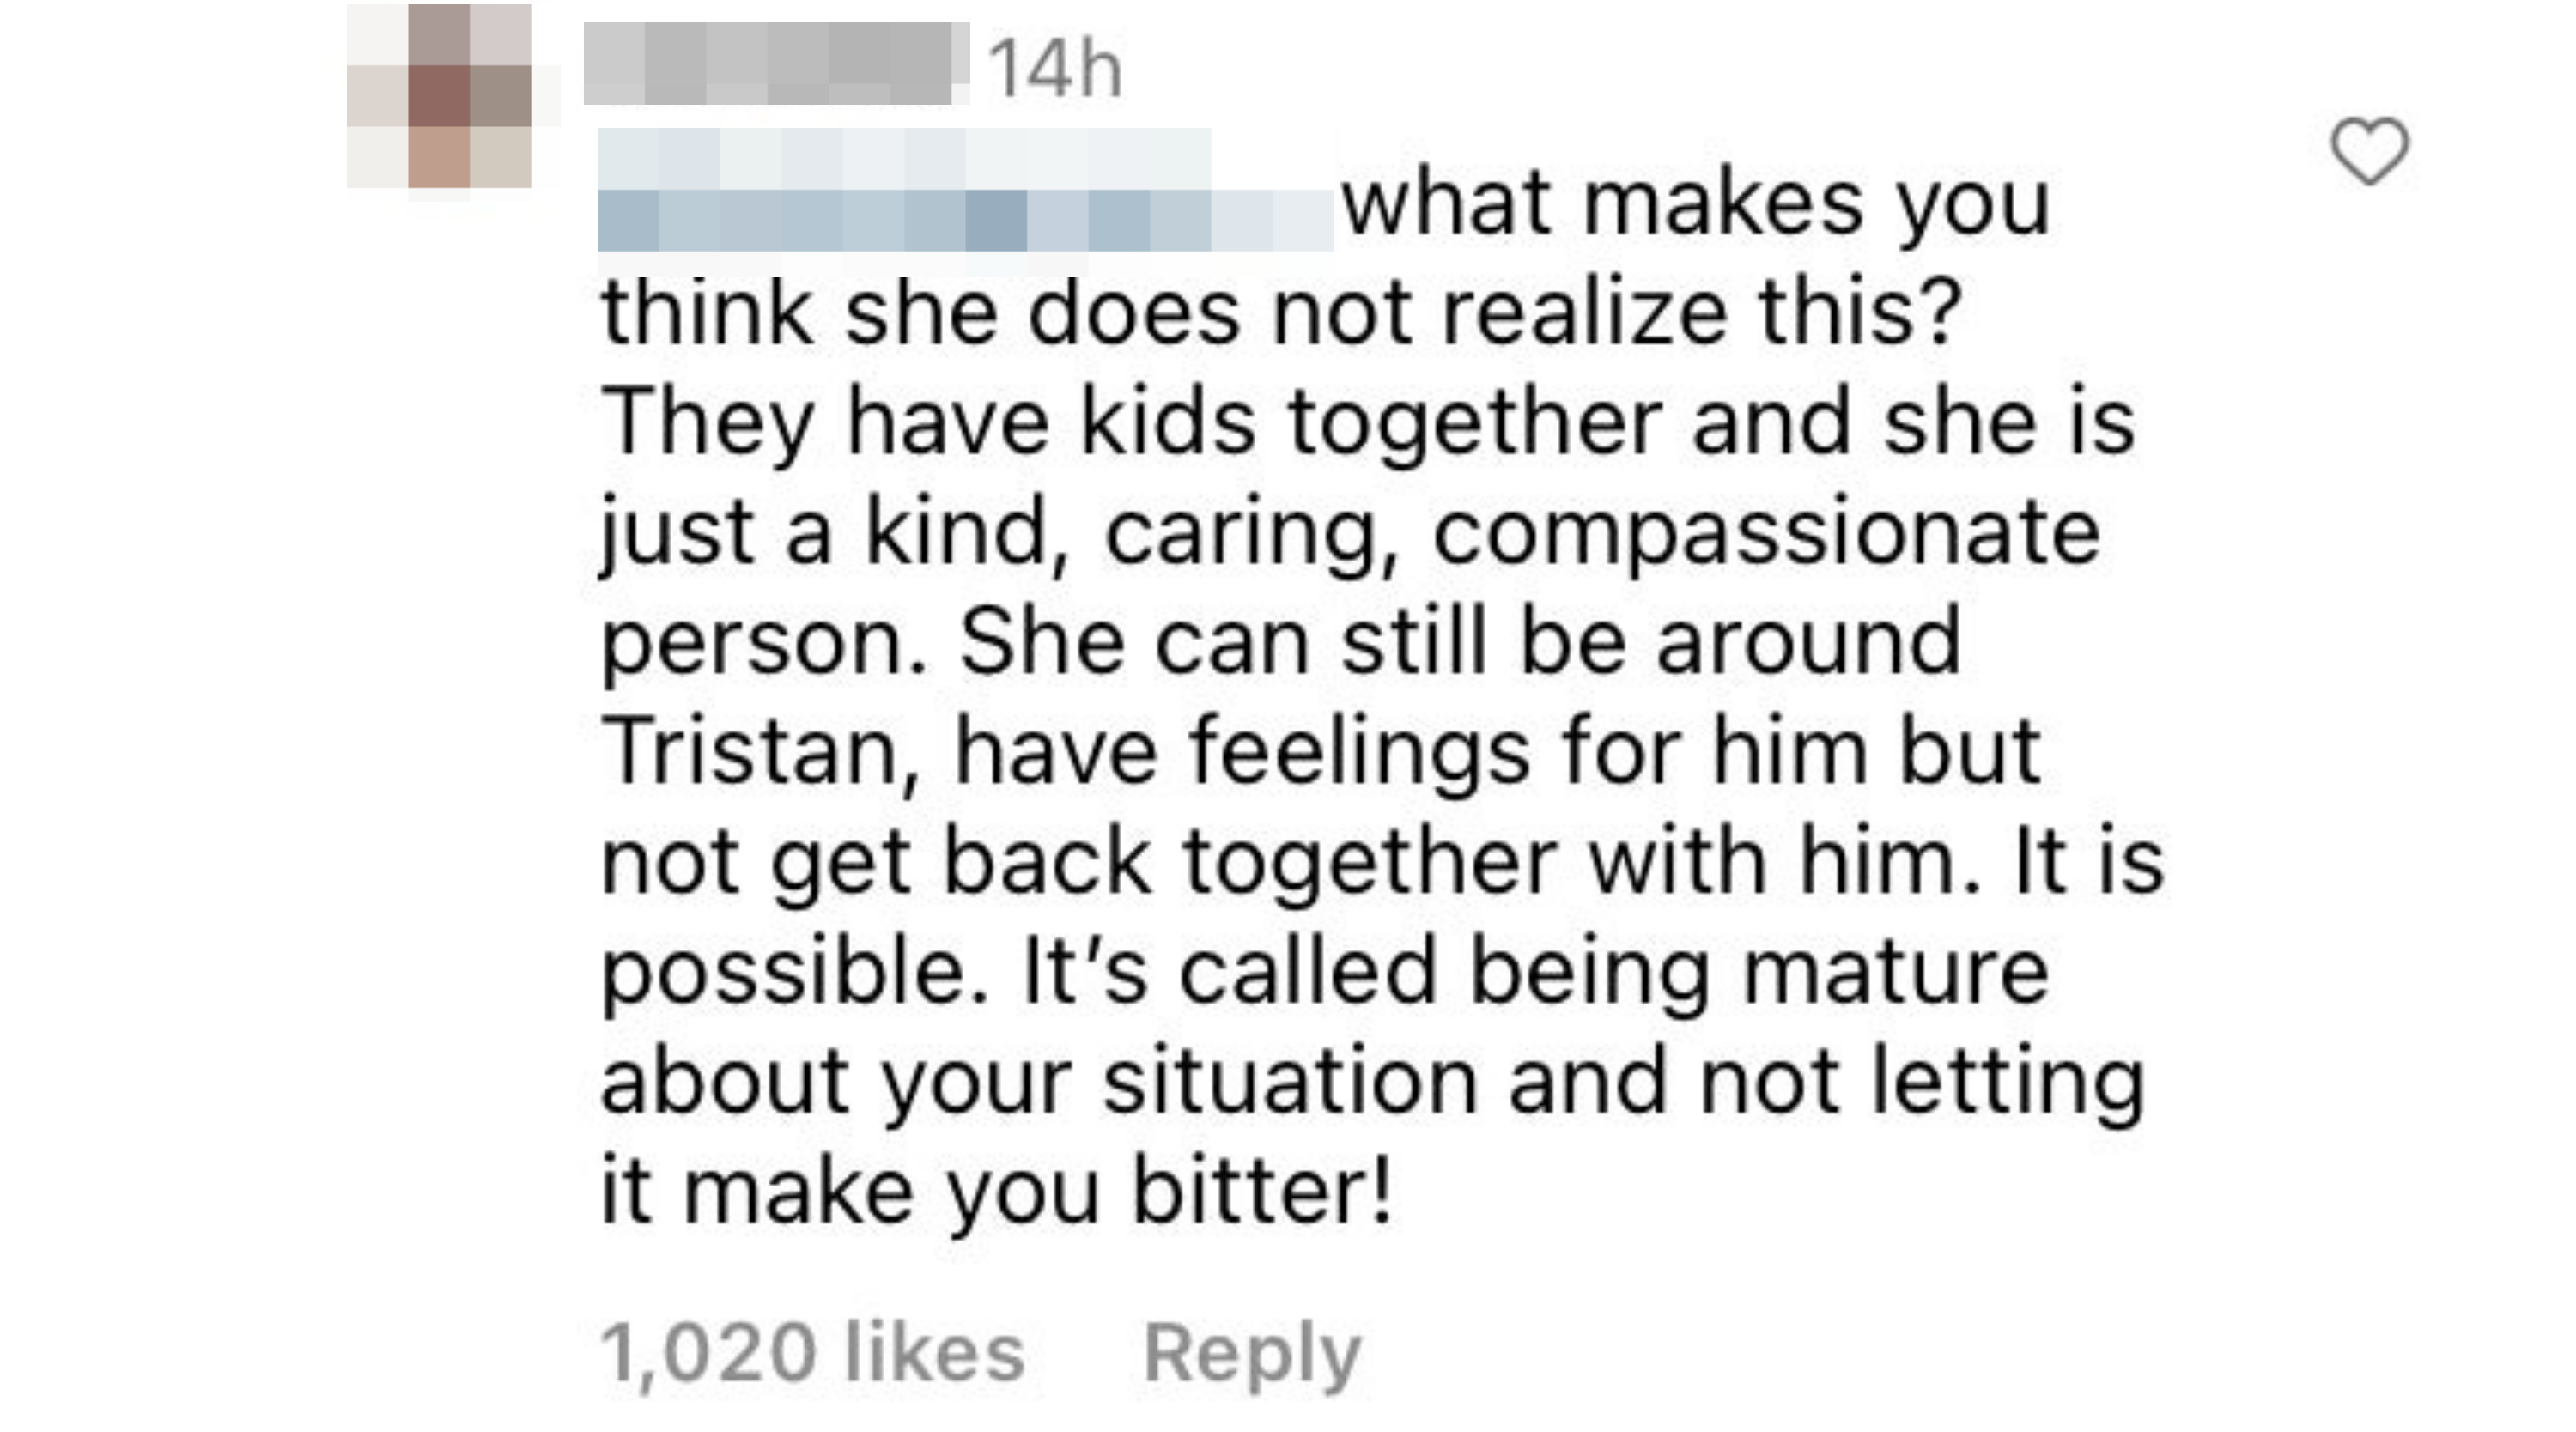 Screenshot of comment, which also says &quot;They have kids together and she is just a kind, caring, compassionate person&quot;